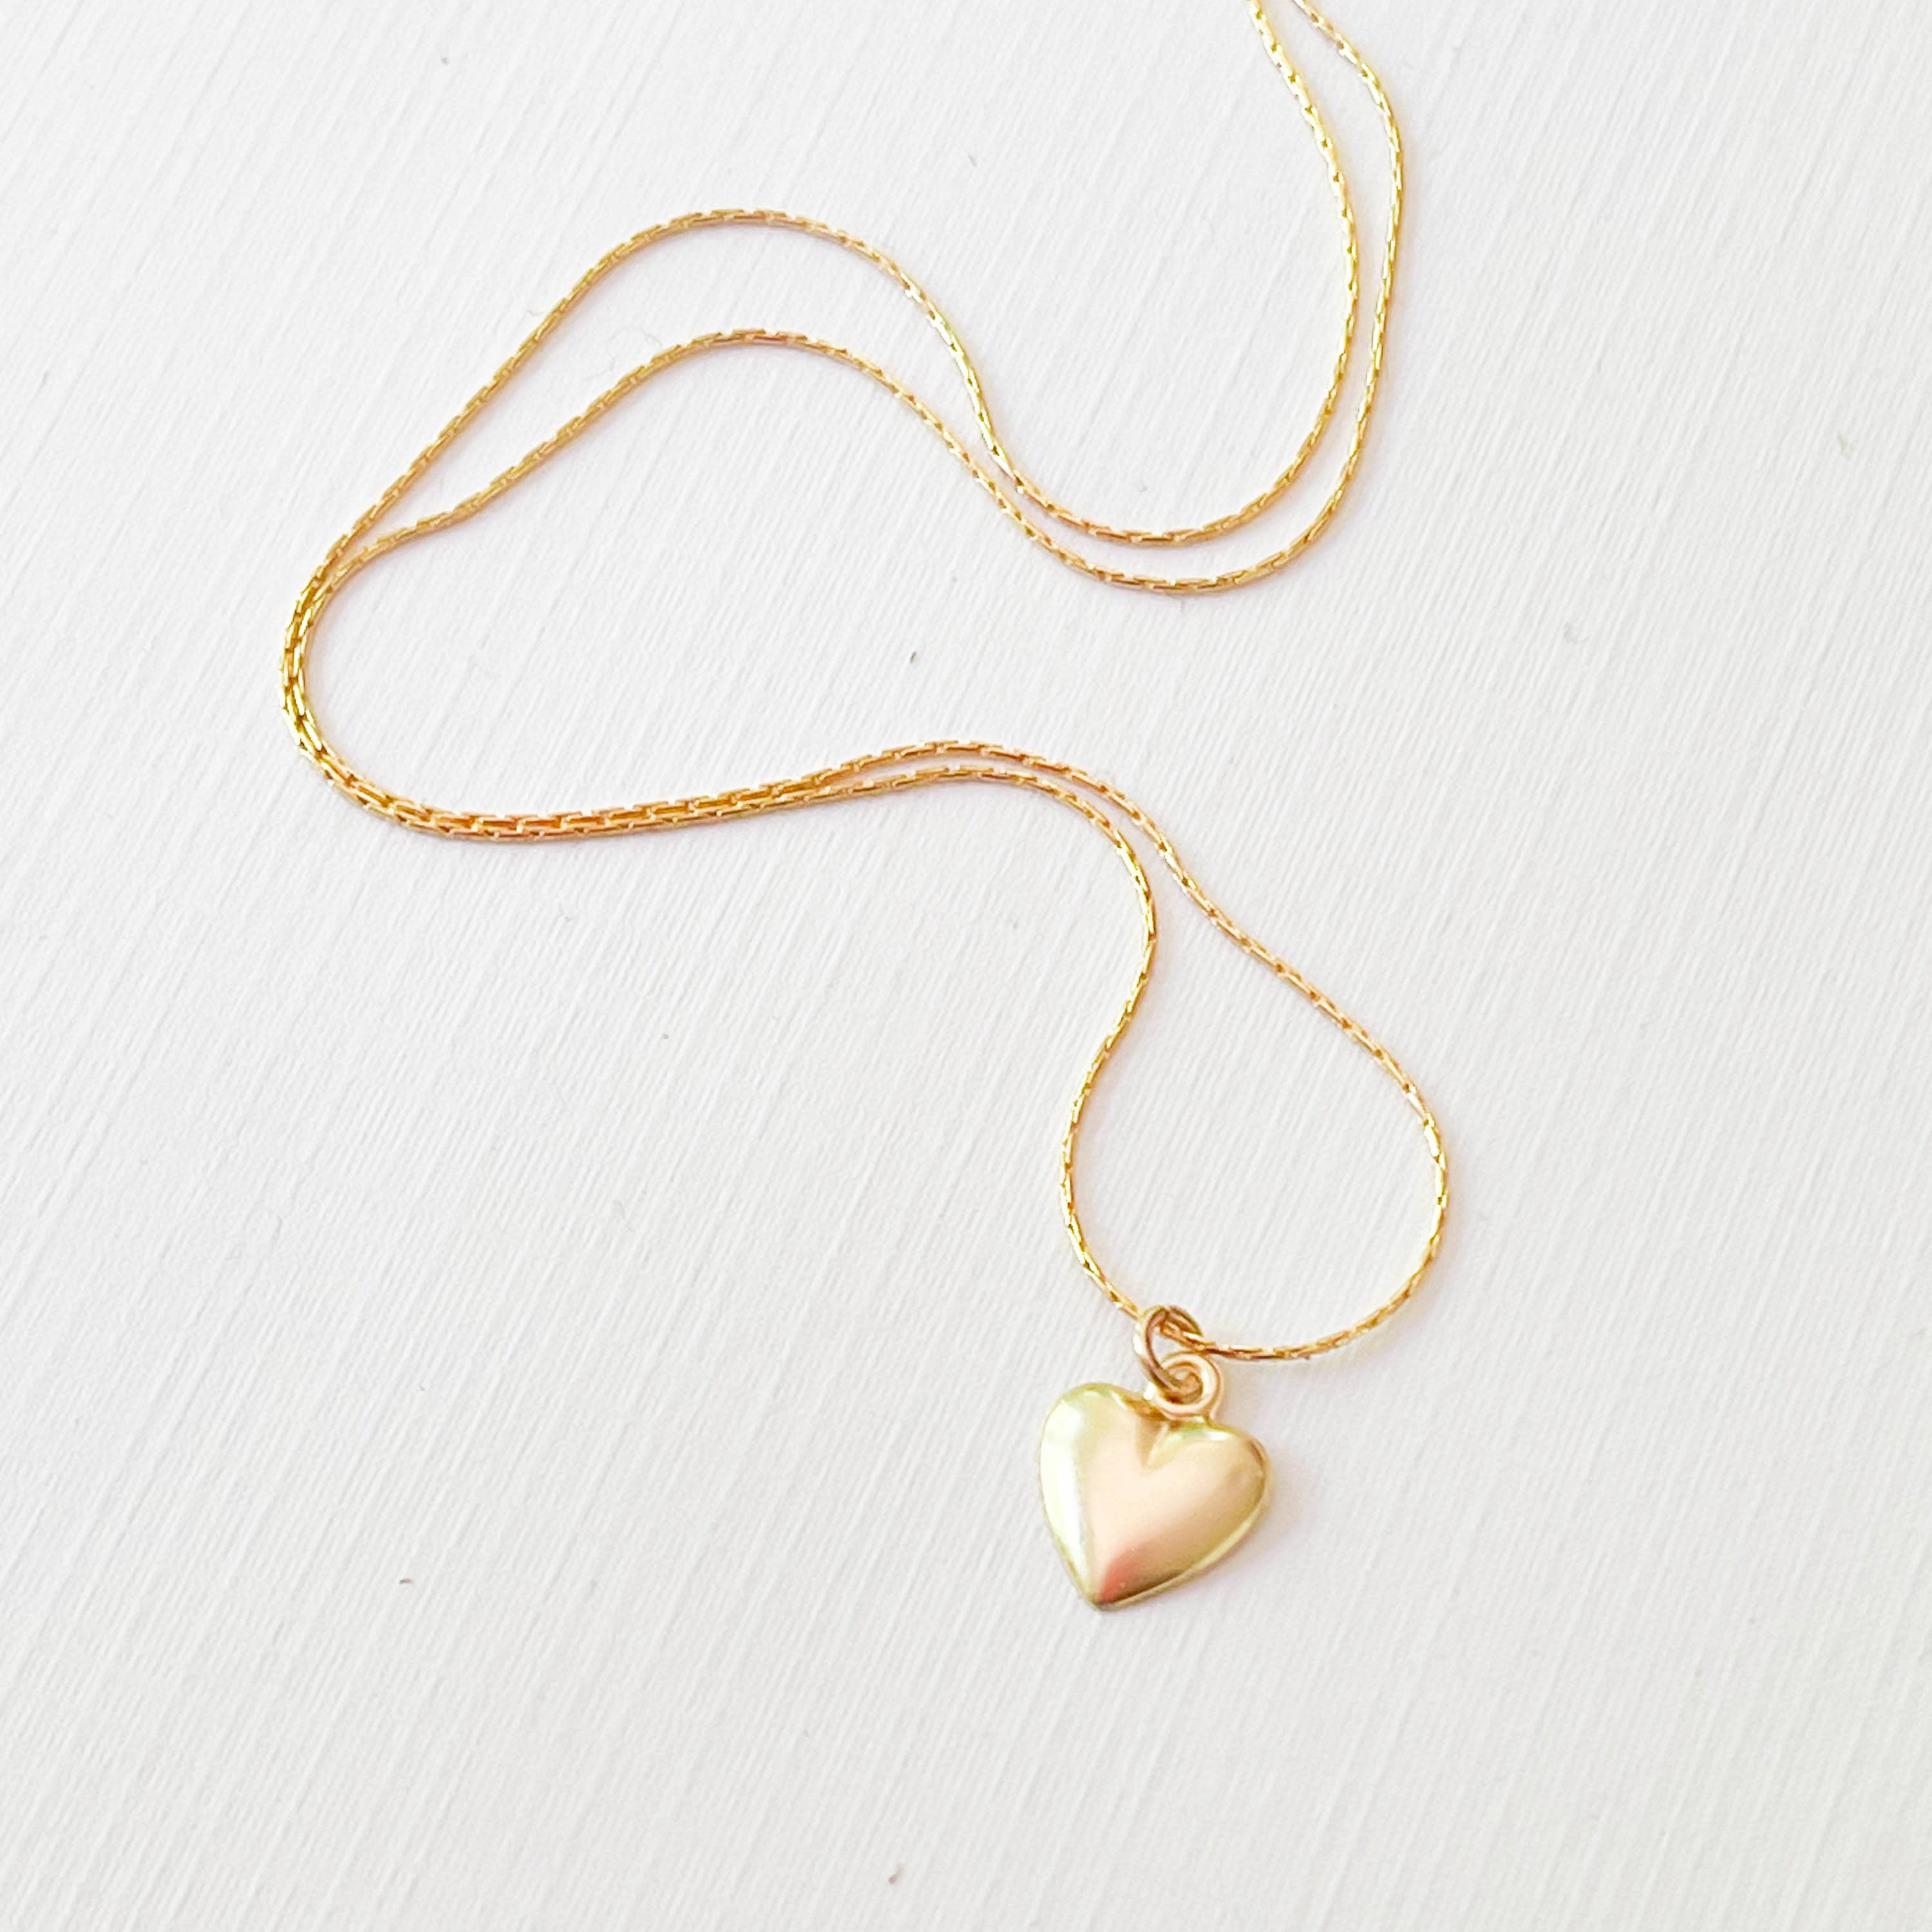 Nest Pretty Things - Gold Filled Heart Necklace